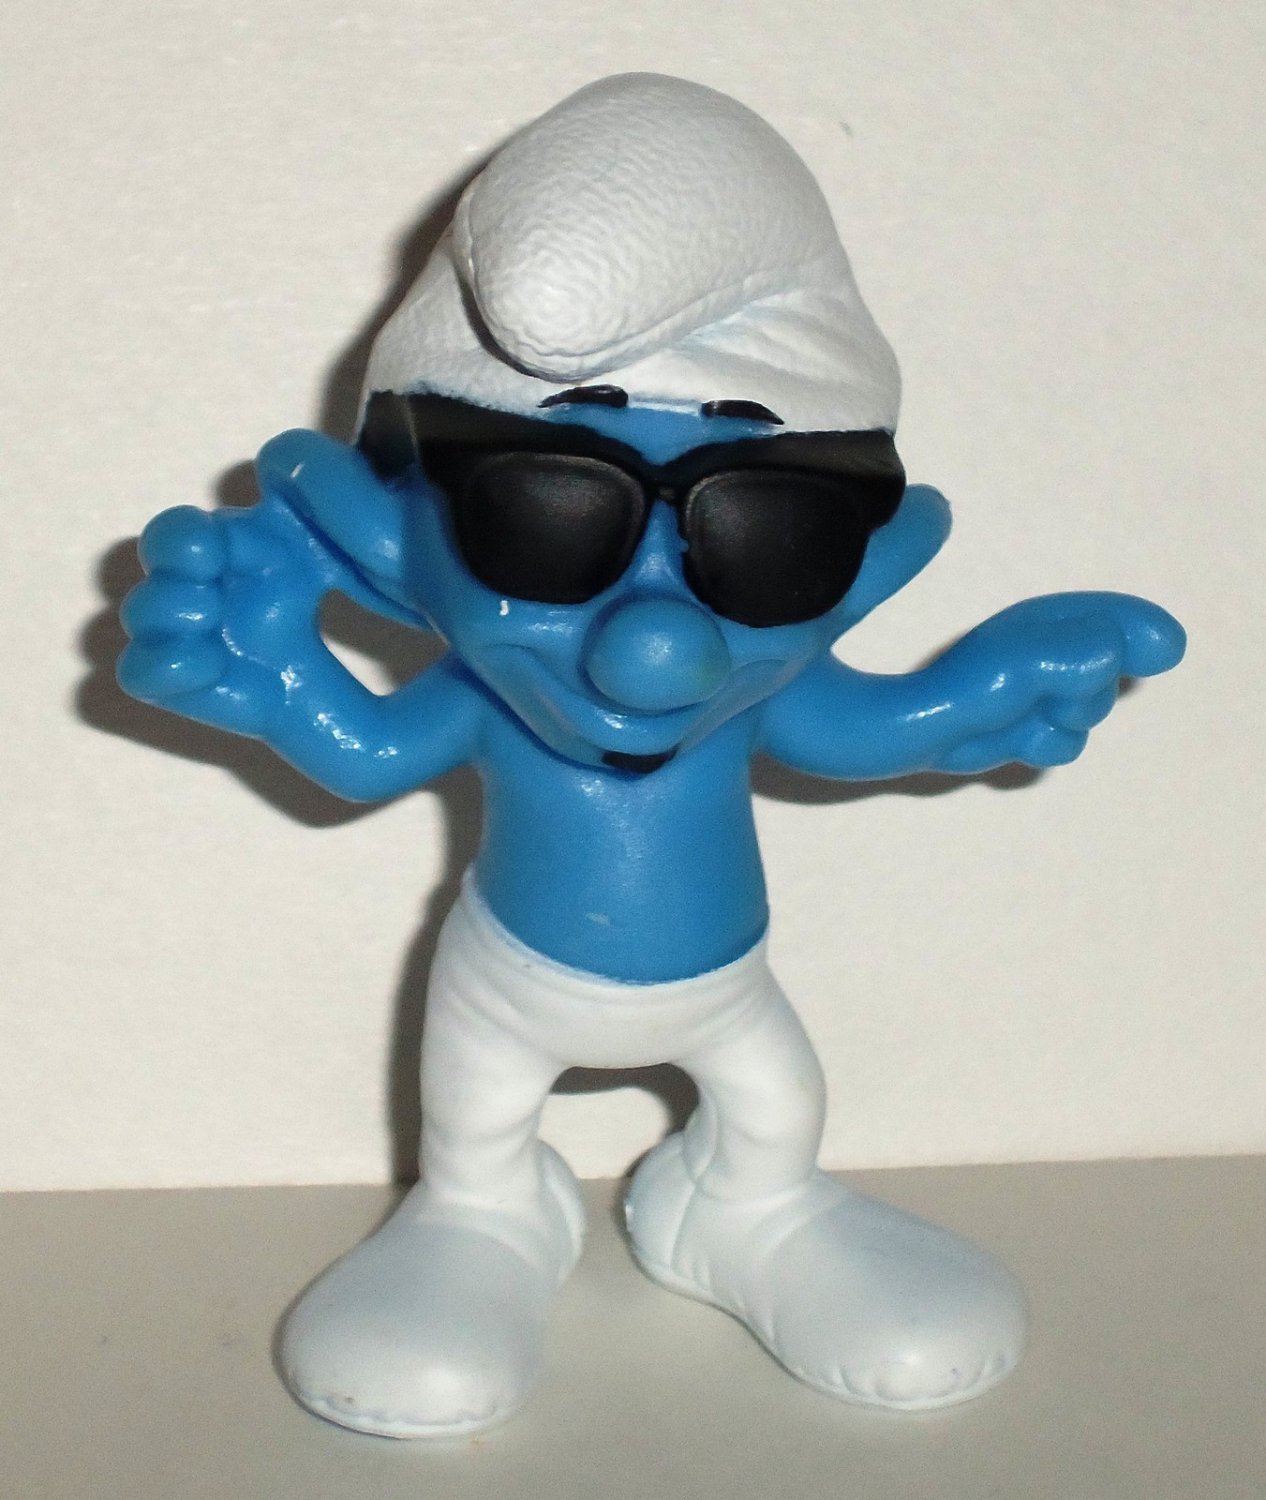 McDonald's 2013 Smurfs 2 Clumsy PVC Figure Happy Meal Toy Loose